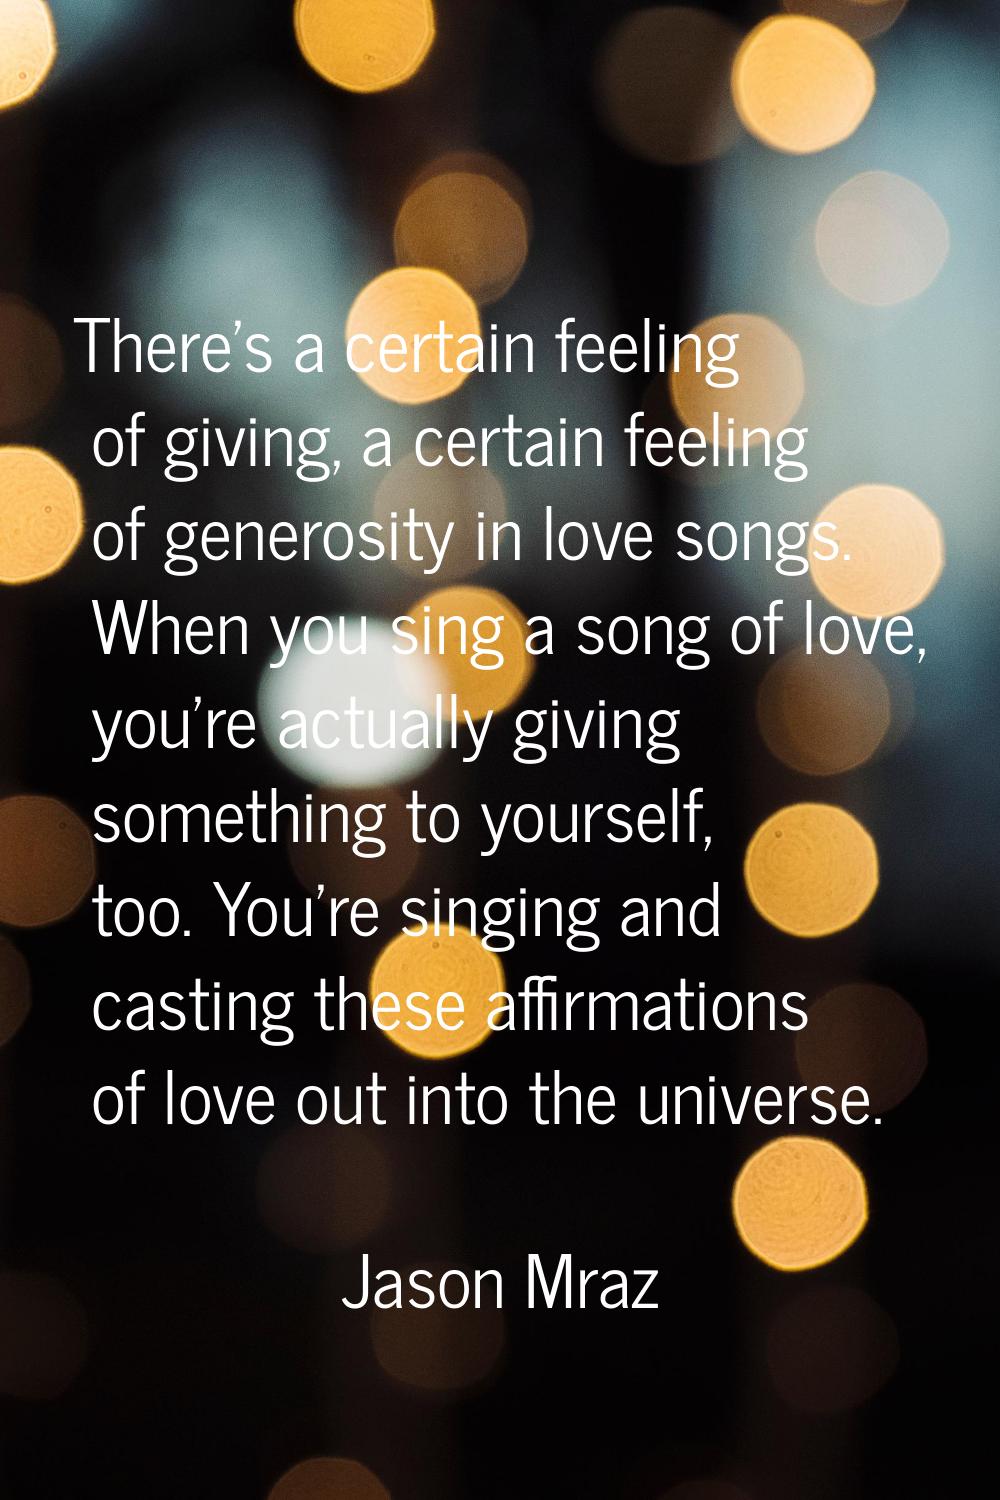 There's a certain feeling of giving, a certain feeling of generosity in love songs. When you sing a